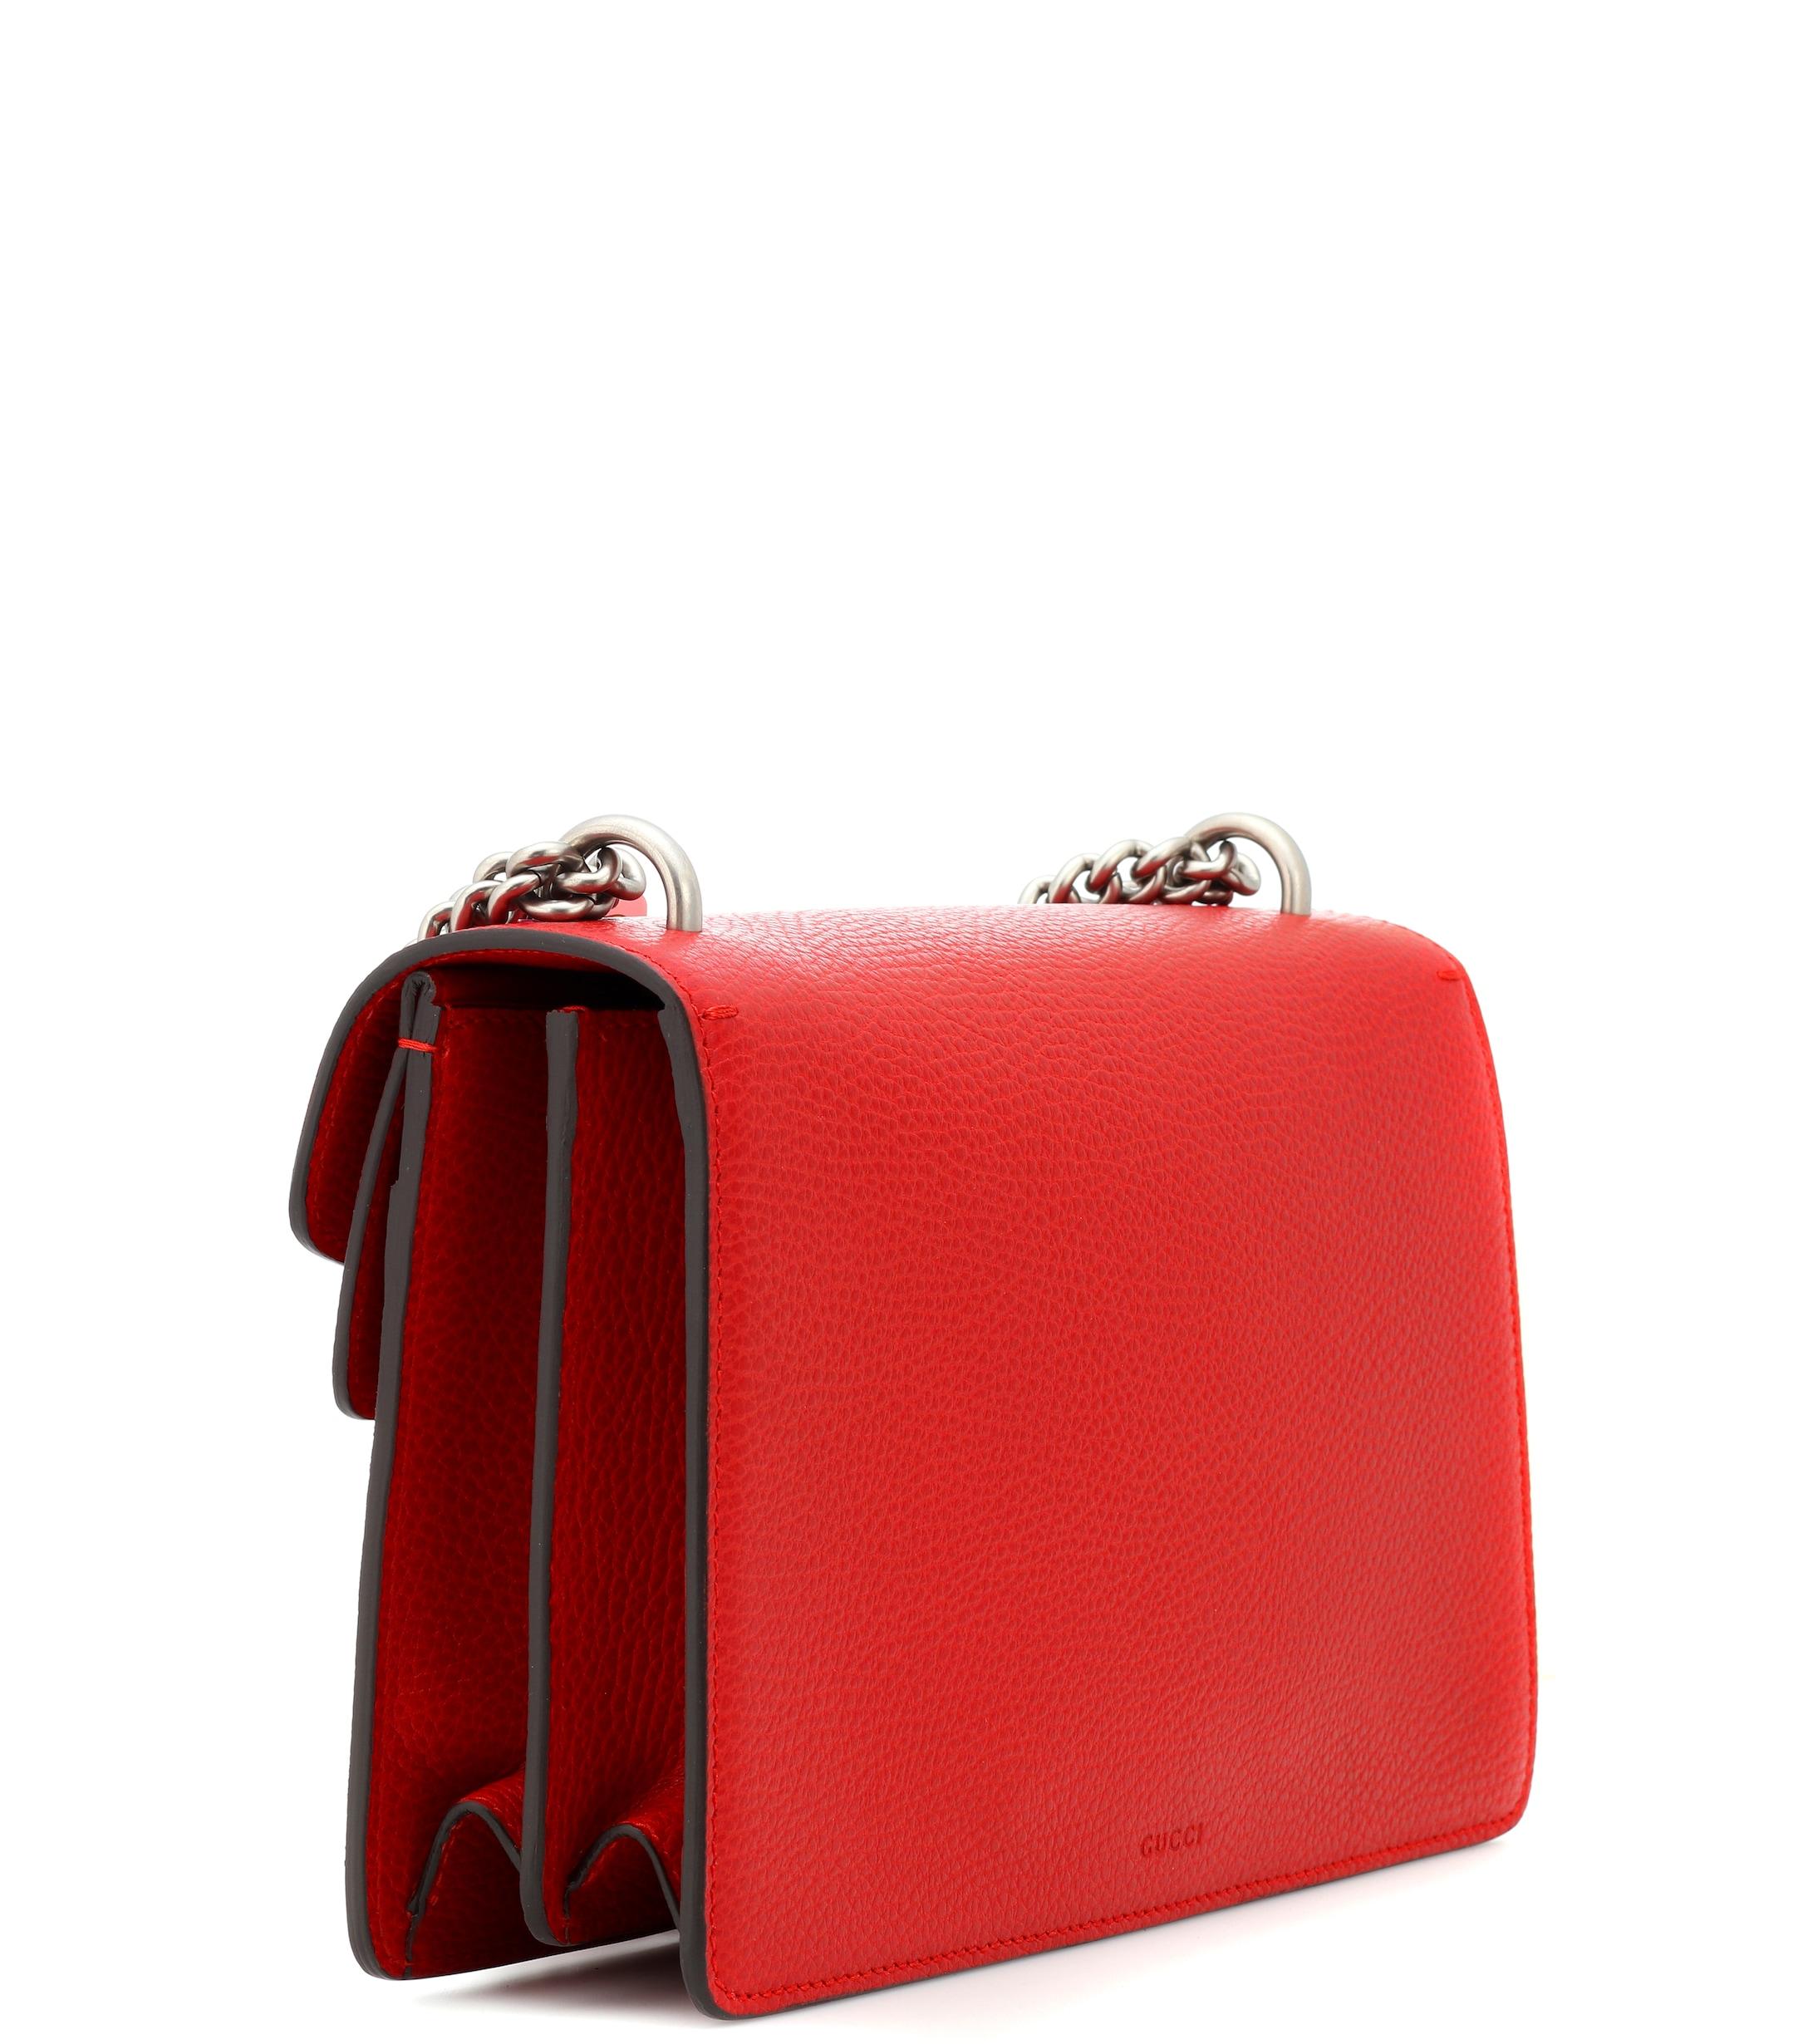 Gucci Dionysus Small Leather Shoulder Bag in Red - Lyst